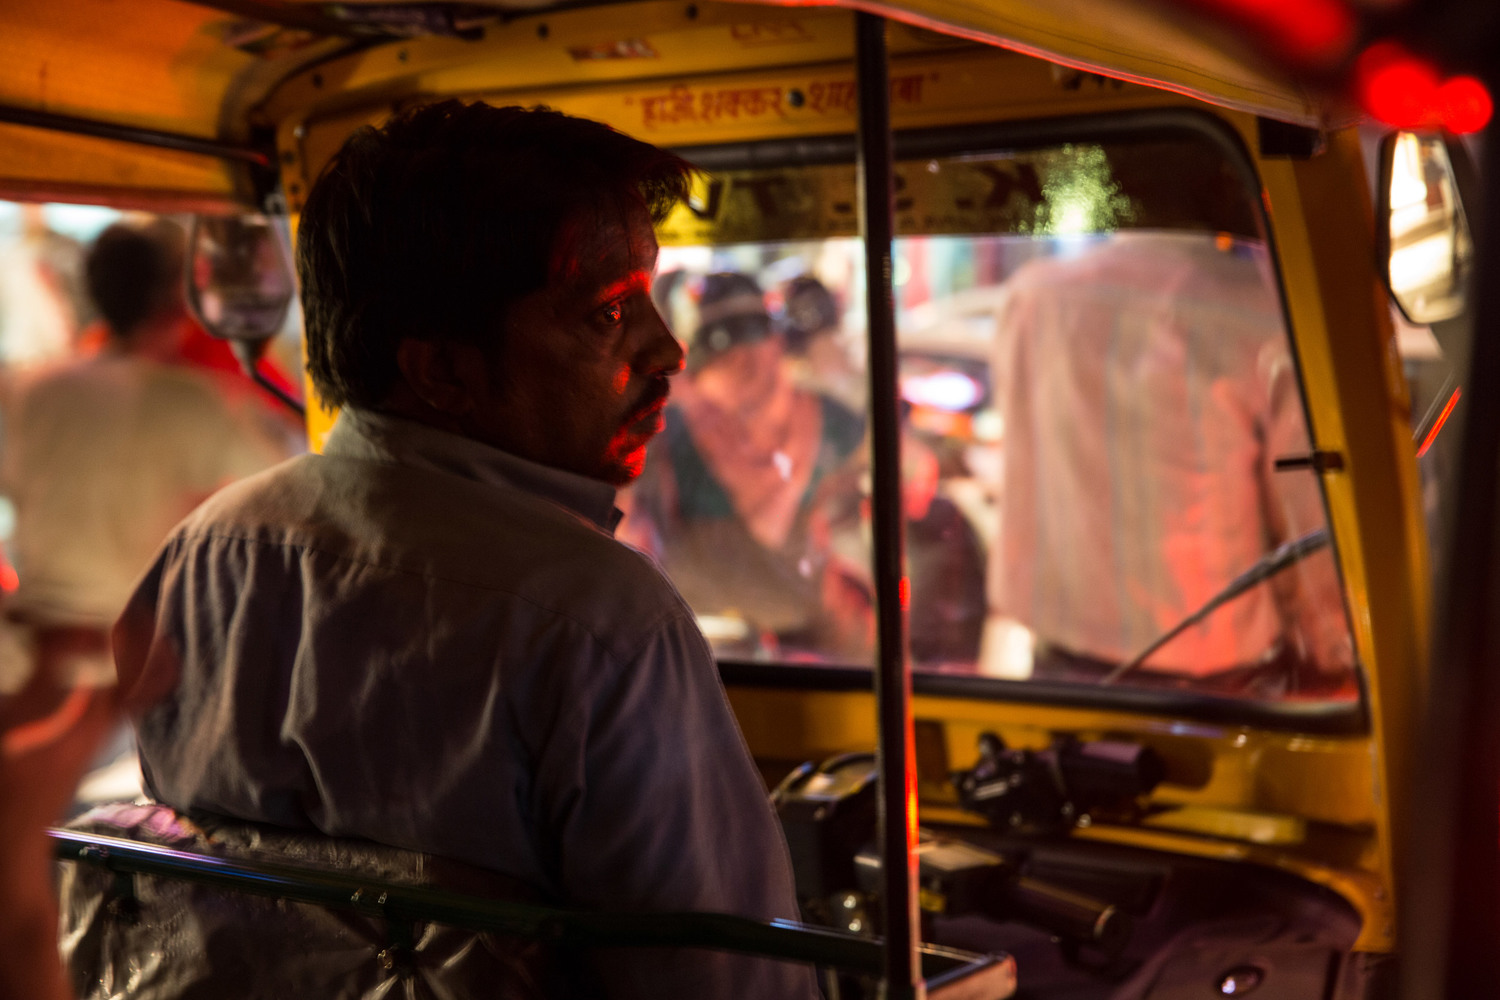  Many of the neighborhood’s men make their living as tuk-tuk drivers. They work long hours for meager pay. 